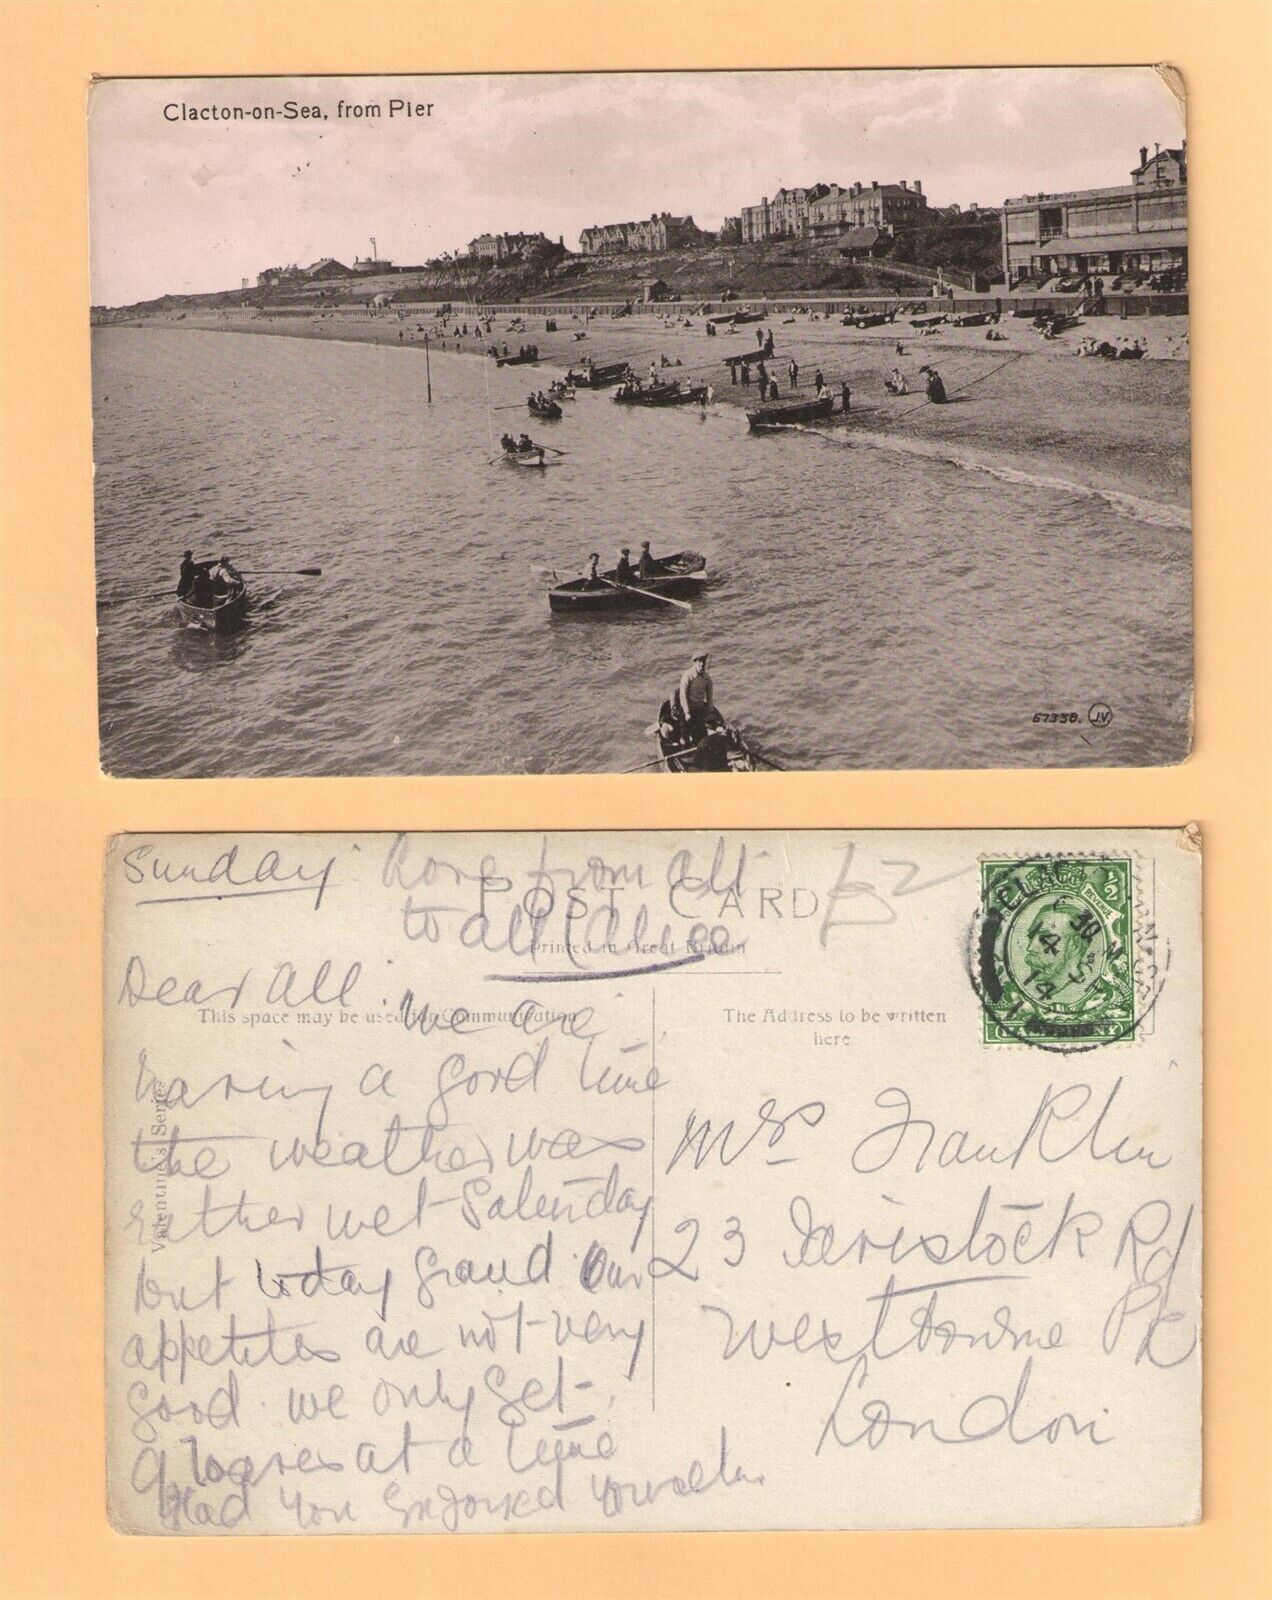 1914 CLACTON-ON-SEA FROM PIER ENGLAND UK RPPC REAL PICTURE POSTCARD